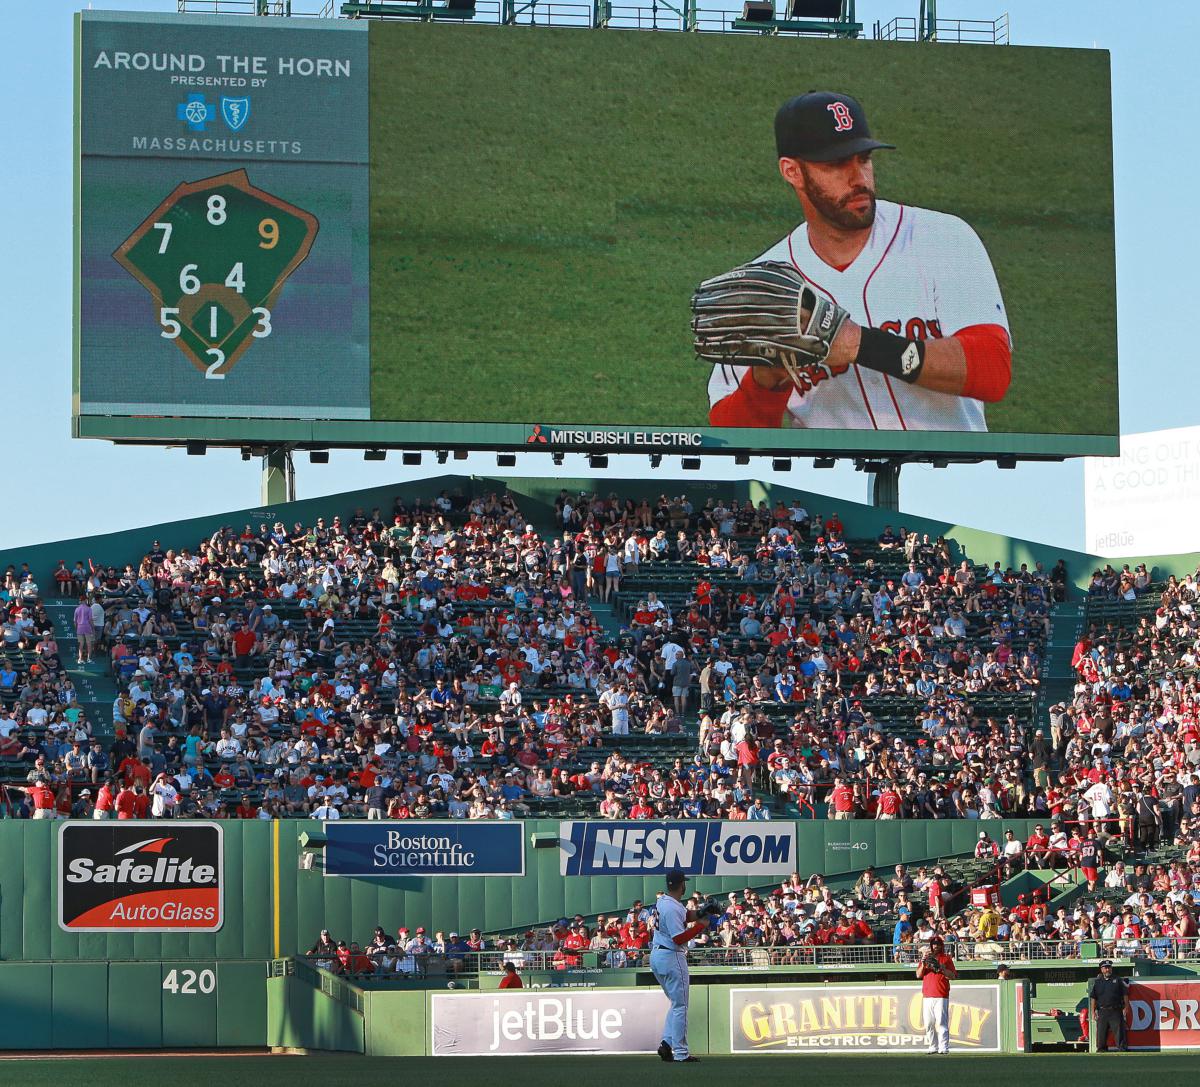 J.D. Martinez is pictured on the video board at Fenway Park, as well as in the field as he warms up, before the start the first inning against the Texas Rangers on July 9.